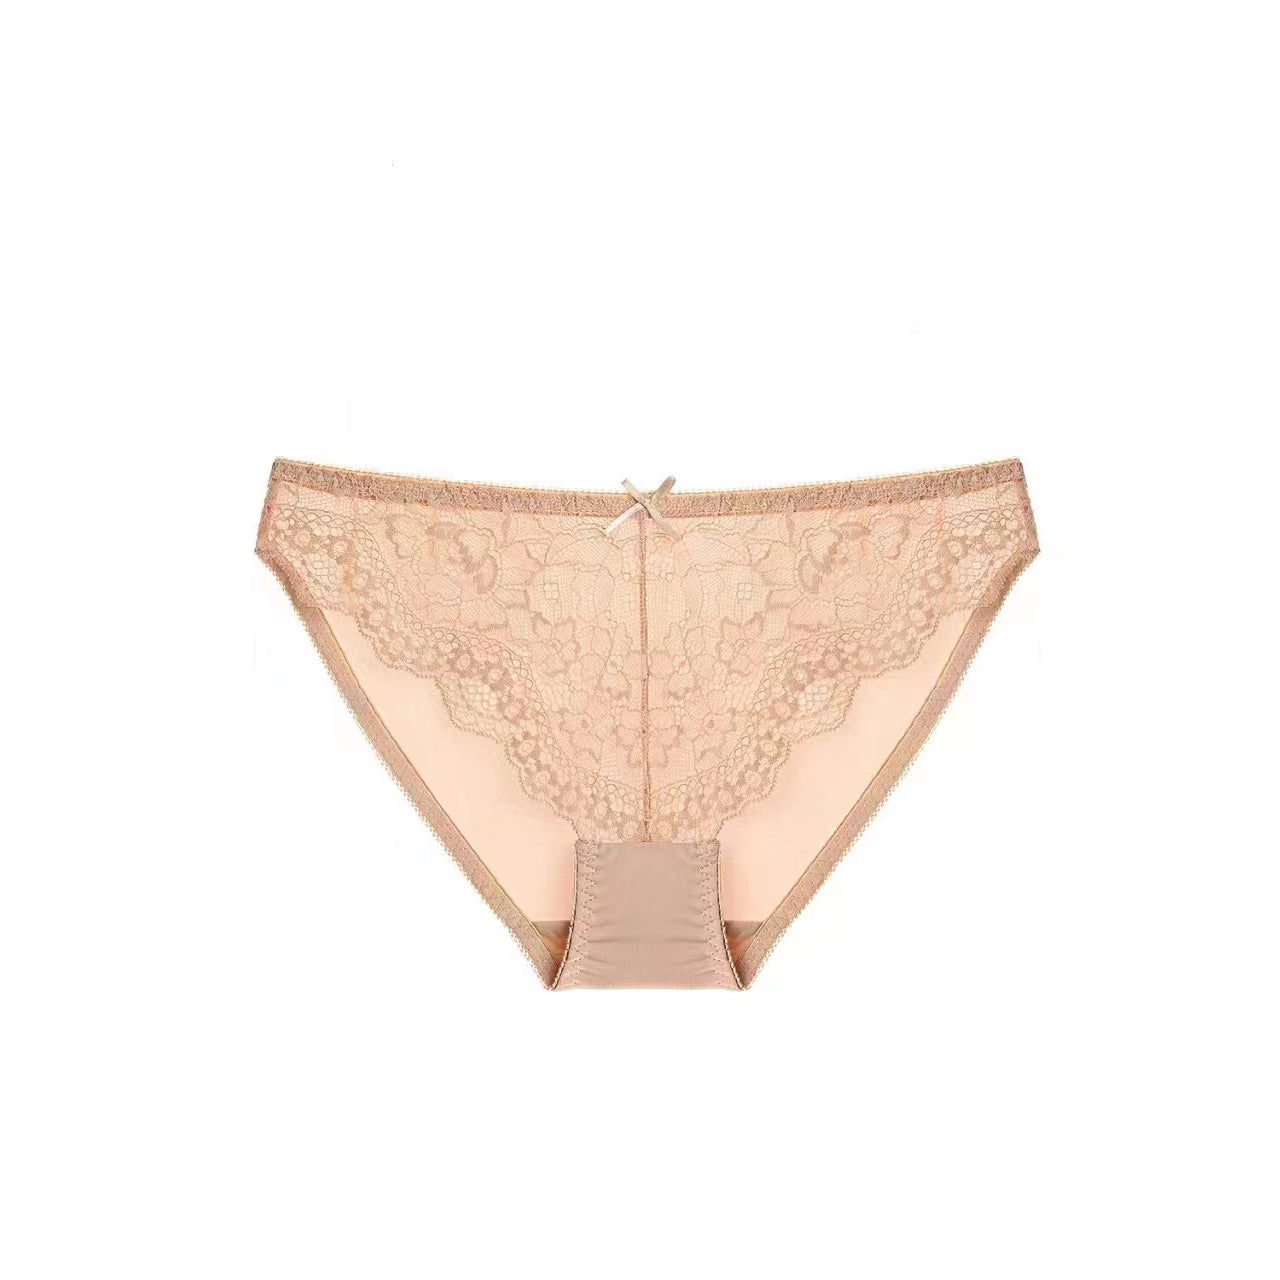 Apricot Mesh Lace Breathable Panty